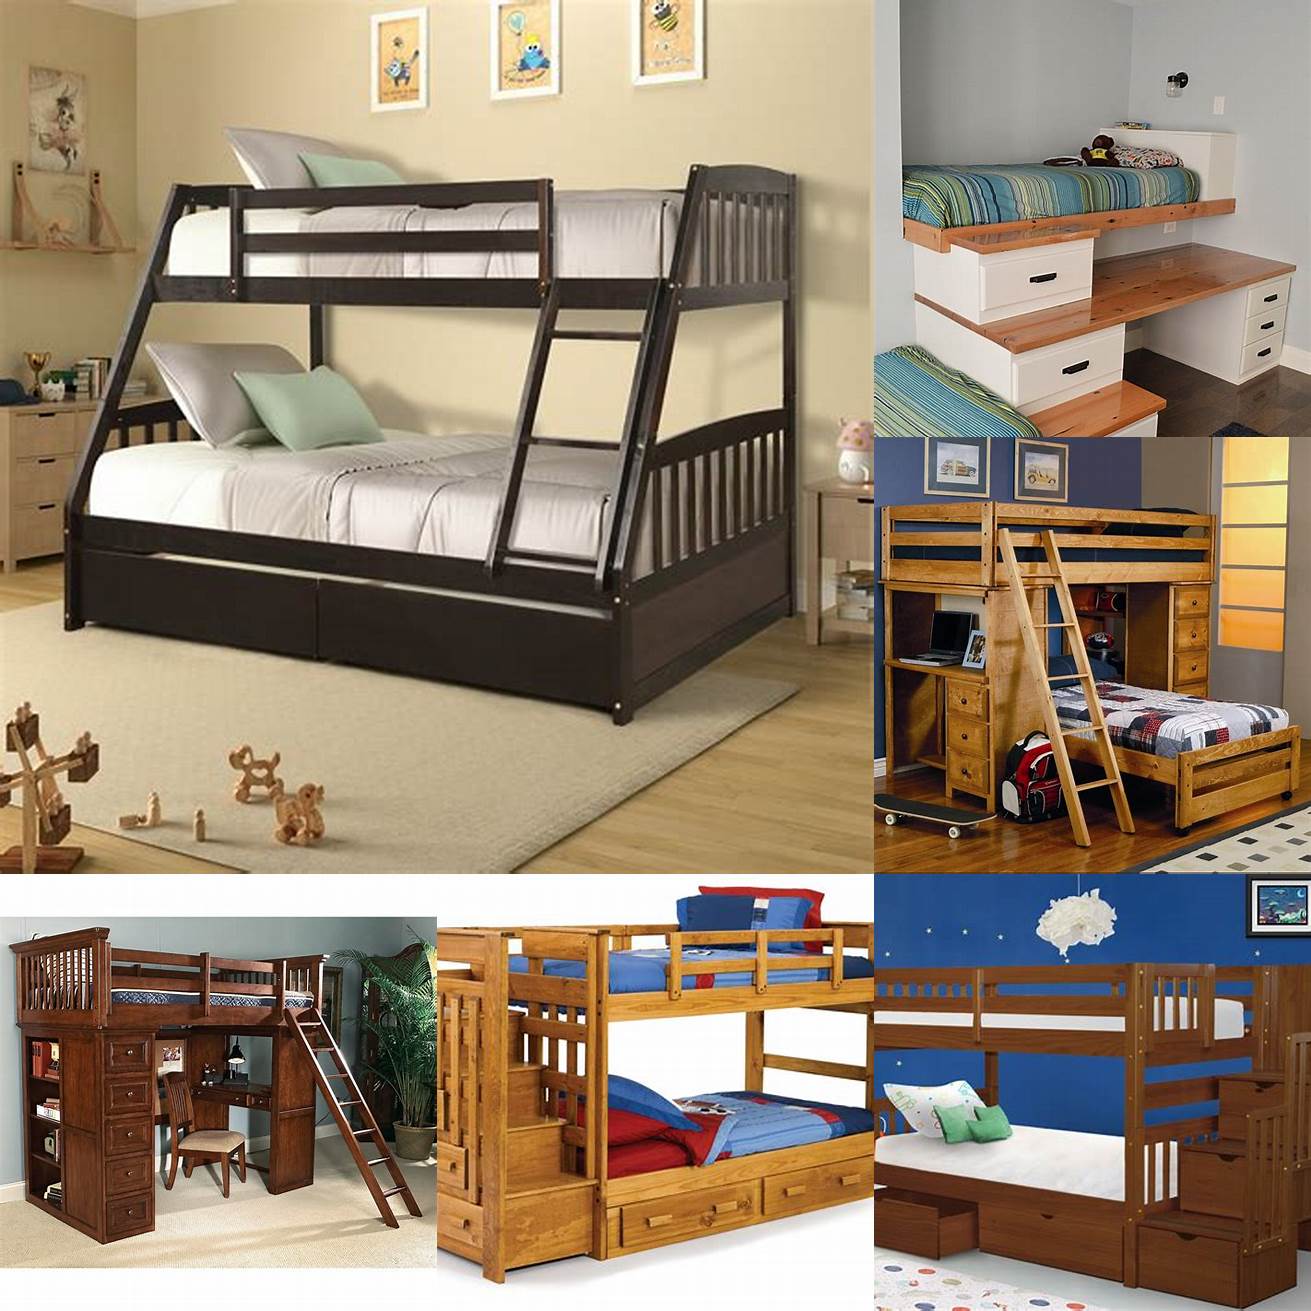 Wooden boys bunk bed with built-in drawers